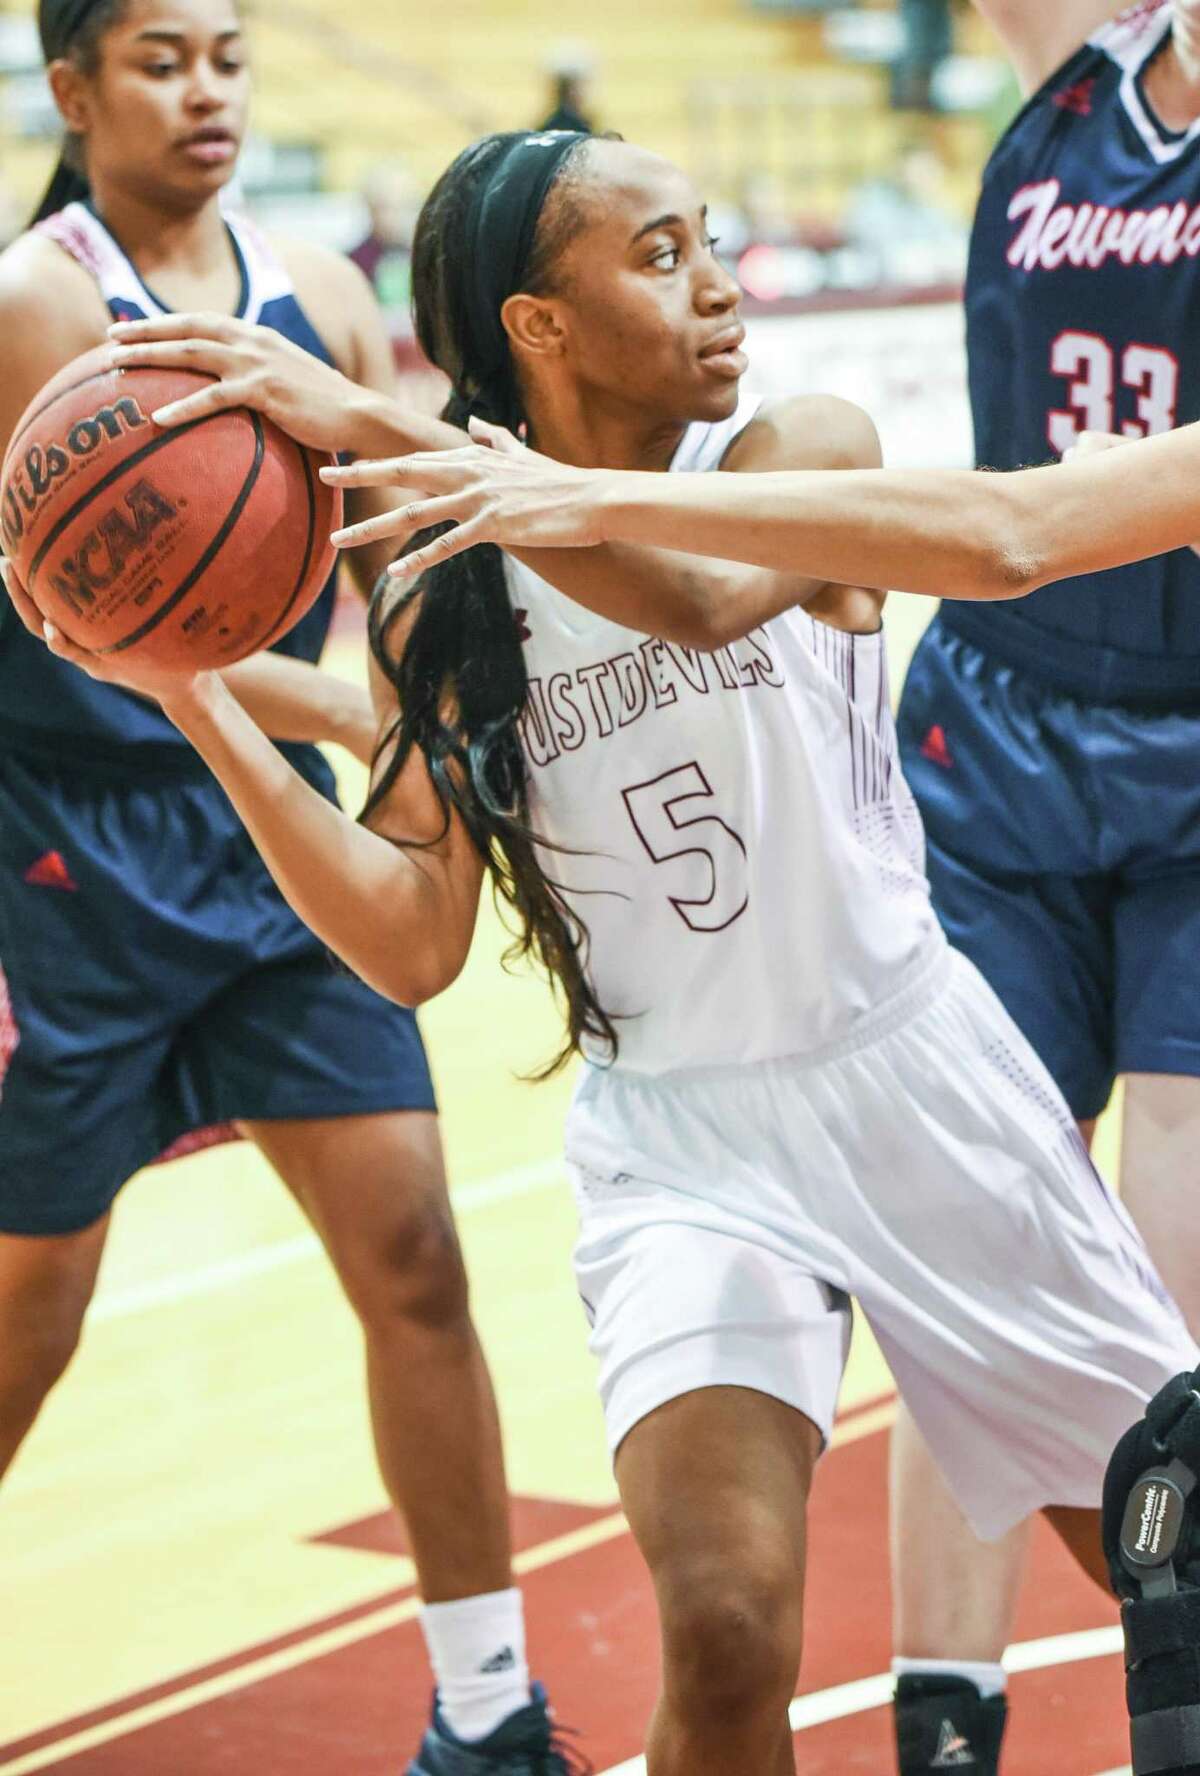 Junior guard Passionate Amukamara scored a team-best 14 points Saturday as the Dustdevils lost 77-57 at Rogers State. TAMIU has lost 10 straight games and 22 consecutive on the road.